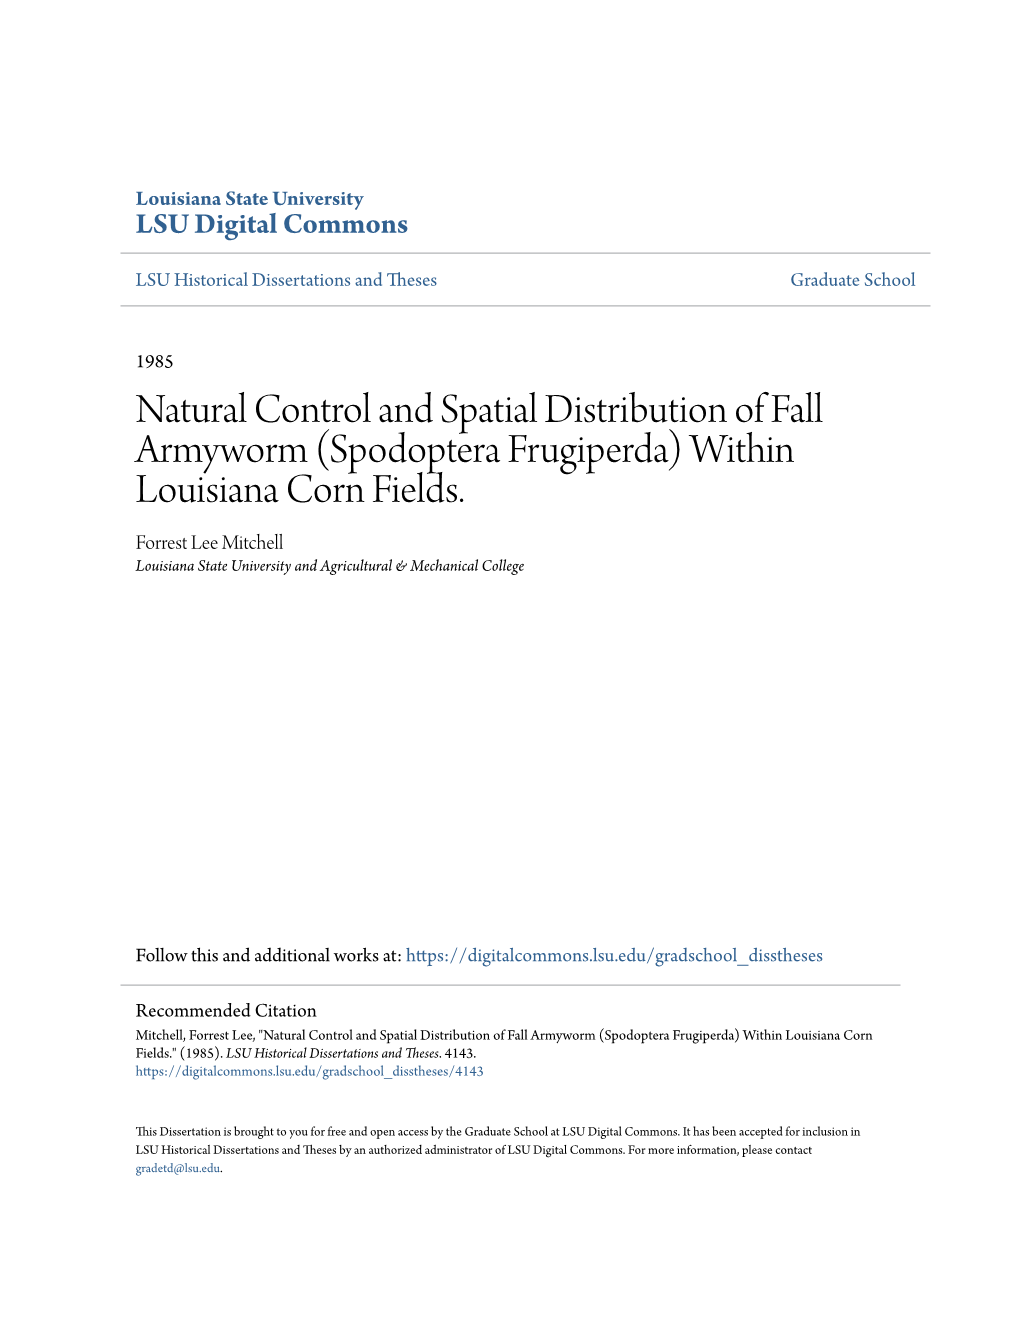 Natural Control and Spatial Distribution of Fall Armyworm (Spodoptera Frugiperda) Within Louisiana Corn Fields